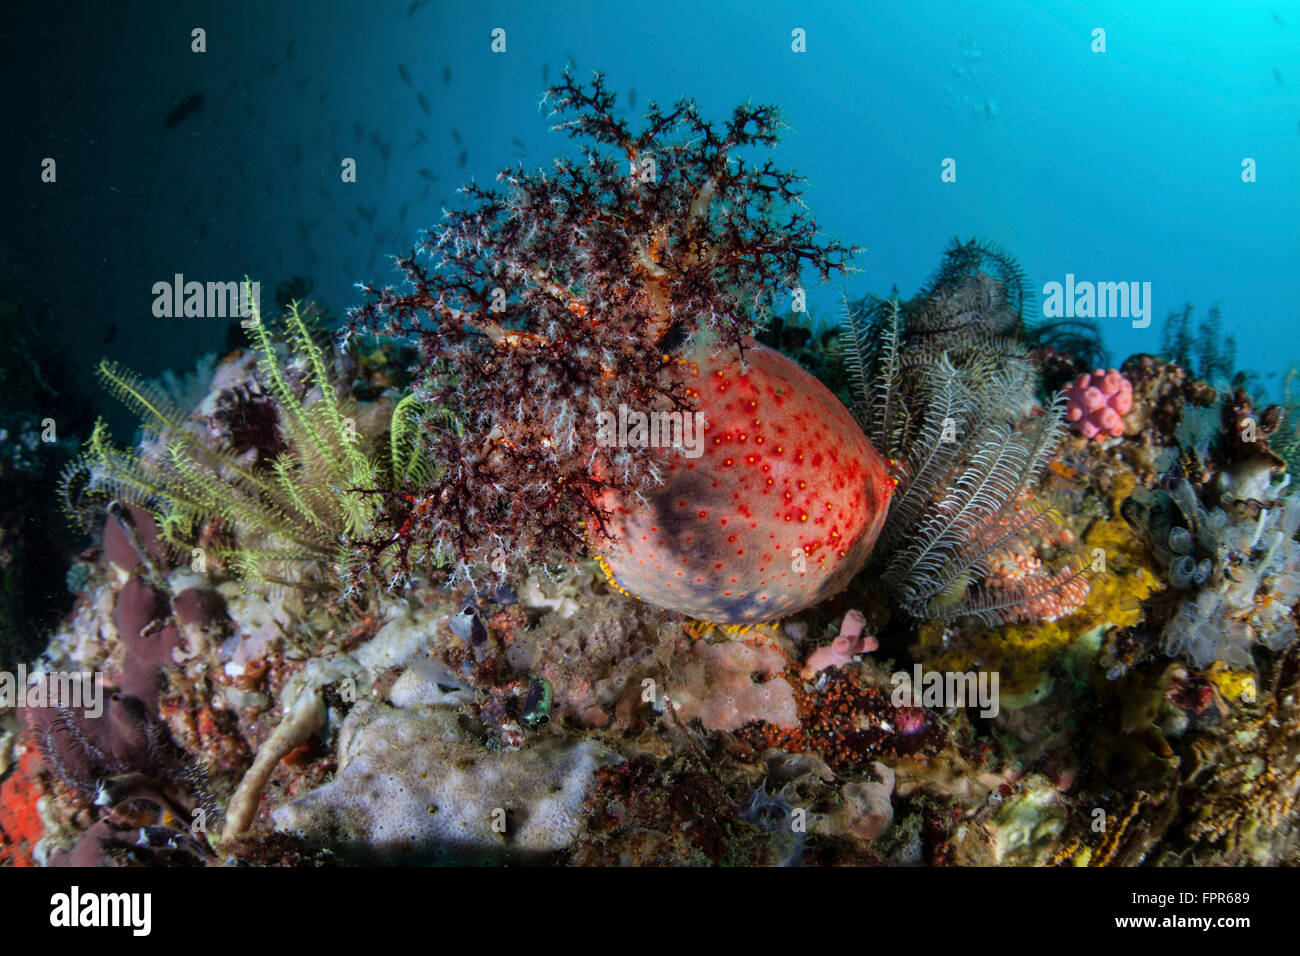 A colorful sea apple (Pseudocolochirus violaceus) clings to a reef in Komodo National Park, Indonesia. This beautiful area harbo Stock Photo